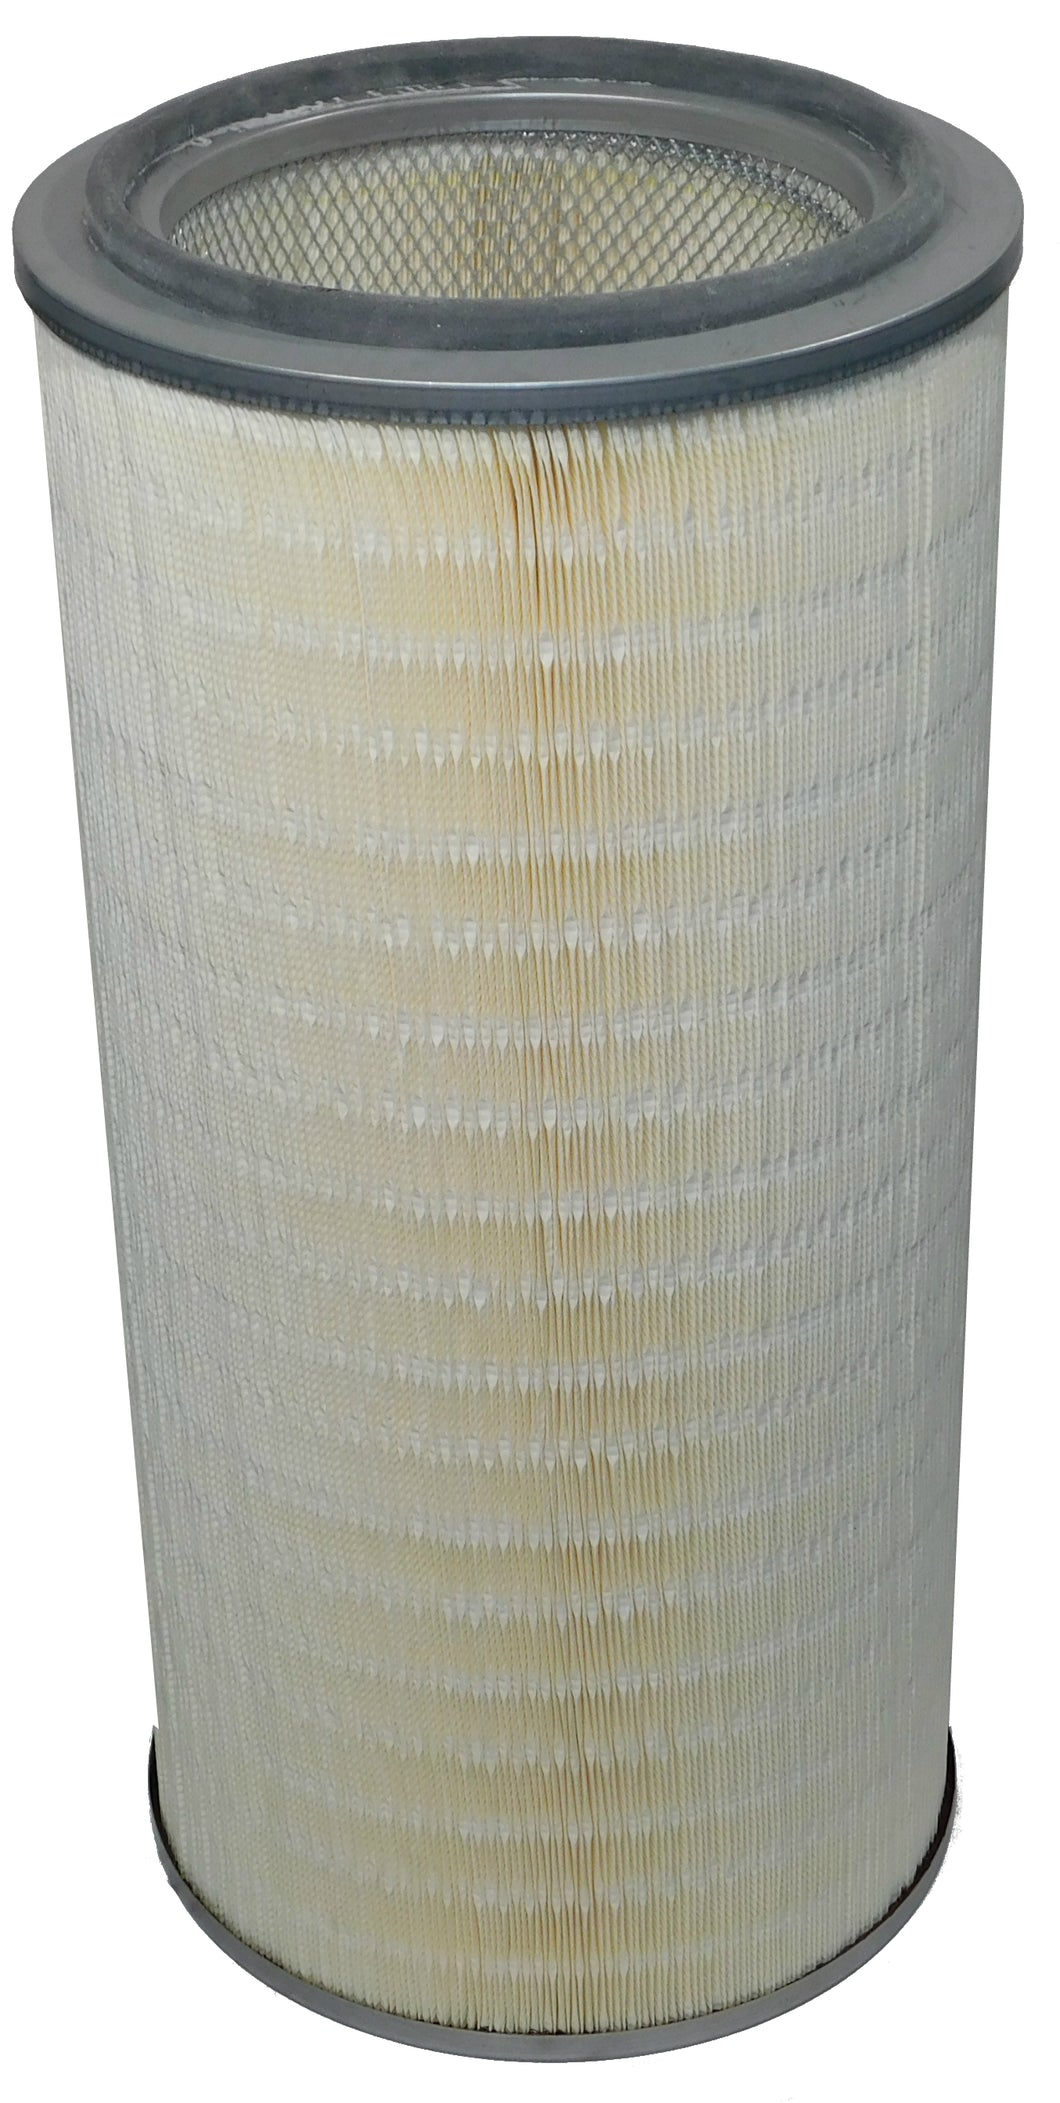 AFQ-3840730104 - Air Purfication Inc - OEM Replacement Filter